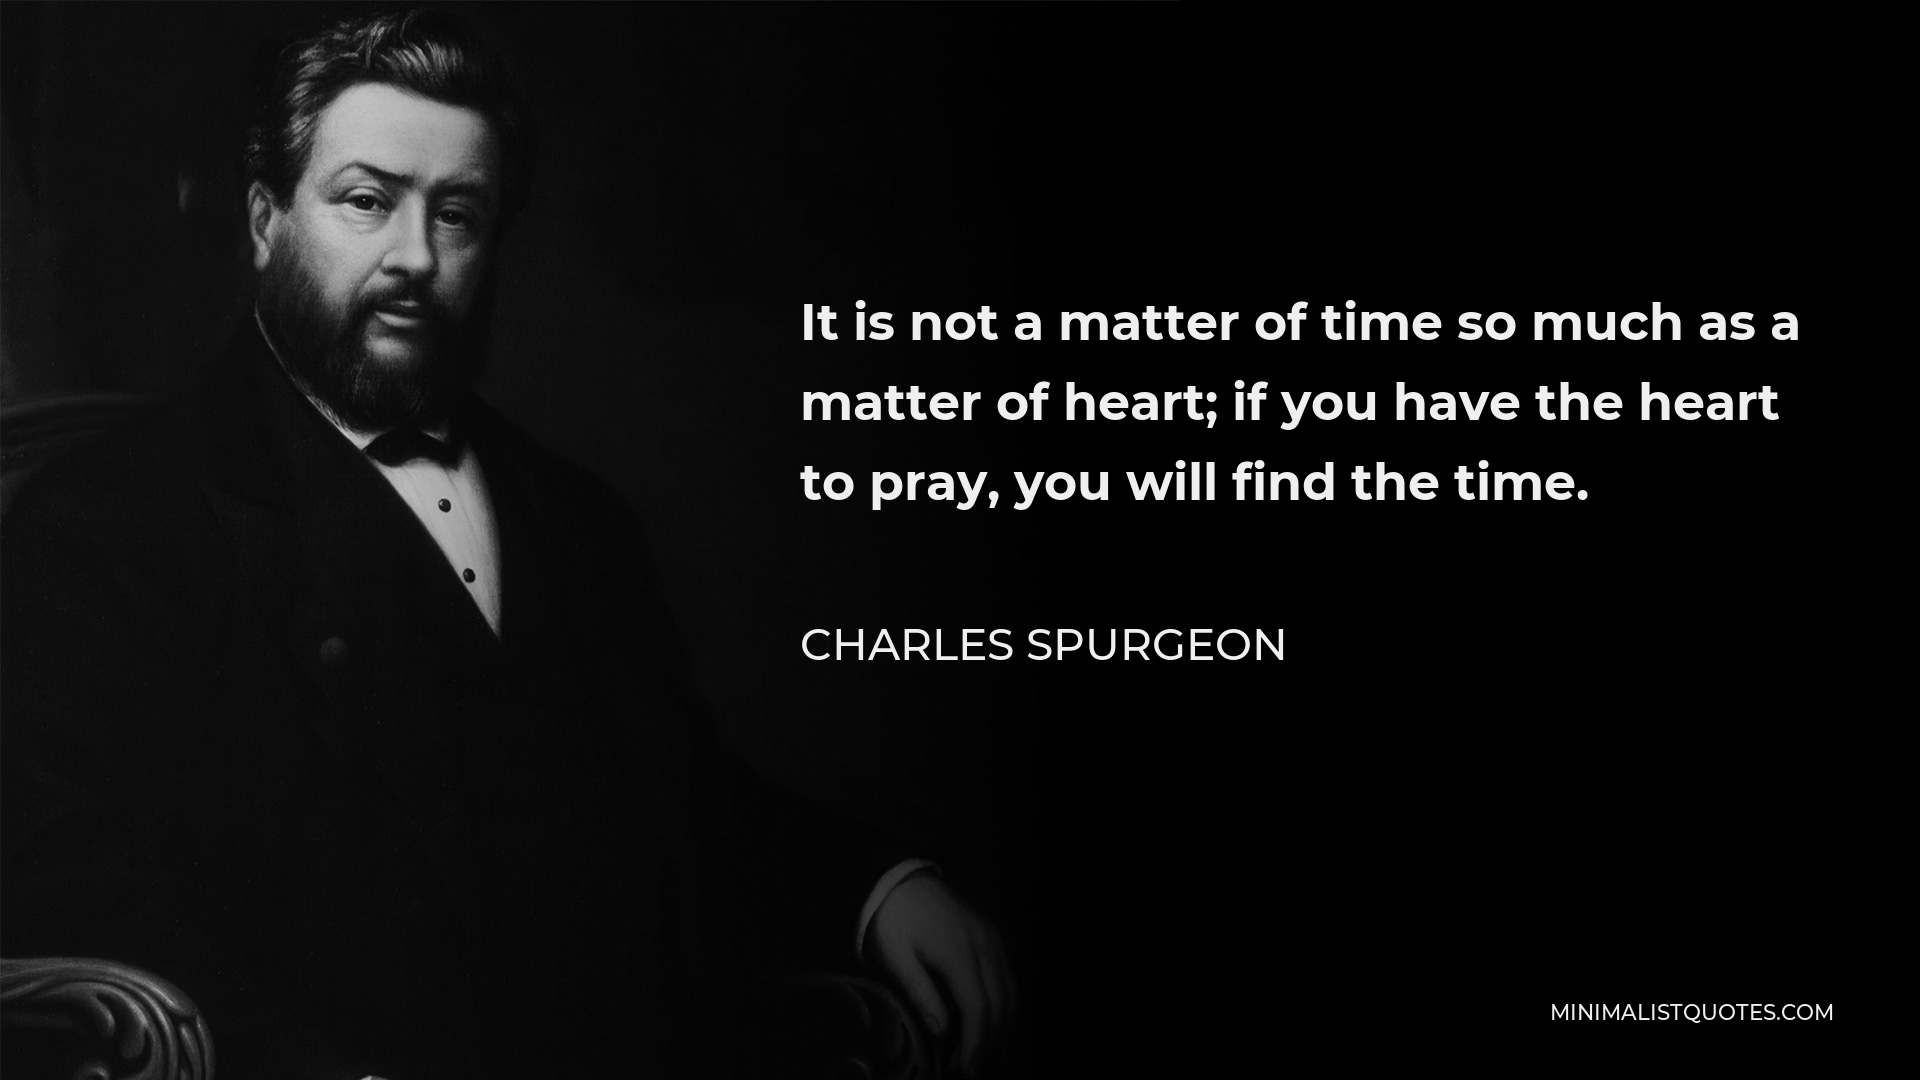 Charles Spurgeon Quote - It is not a matter of time so much as a matter of heart; if you have the heart to pray, you will find the time.